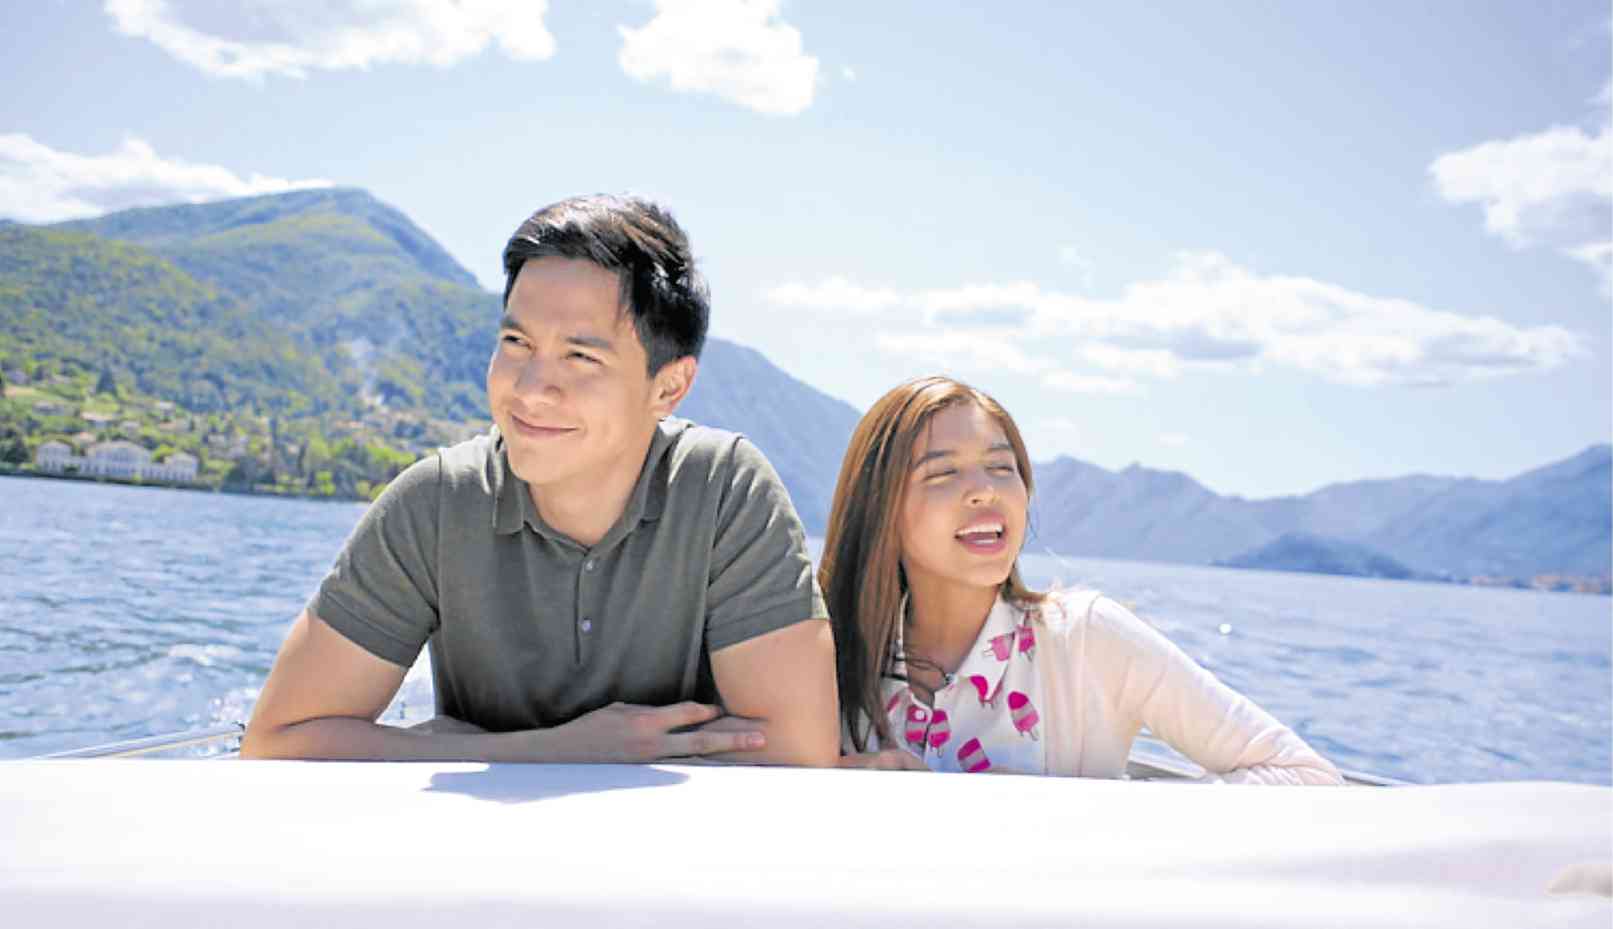 ALDUB: We’re happy. What we show people doesn’t involve pretention.